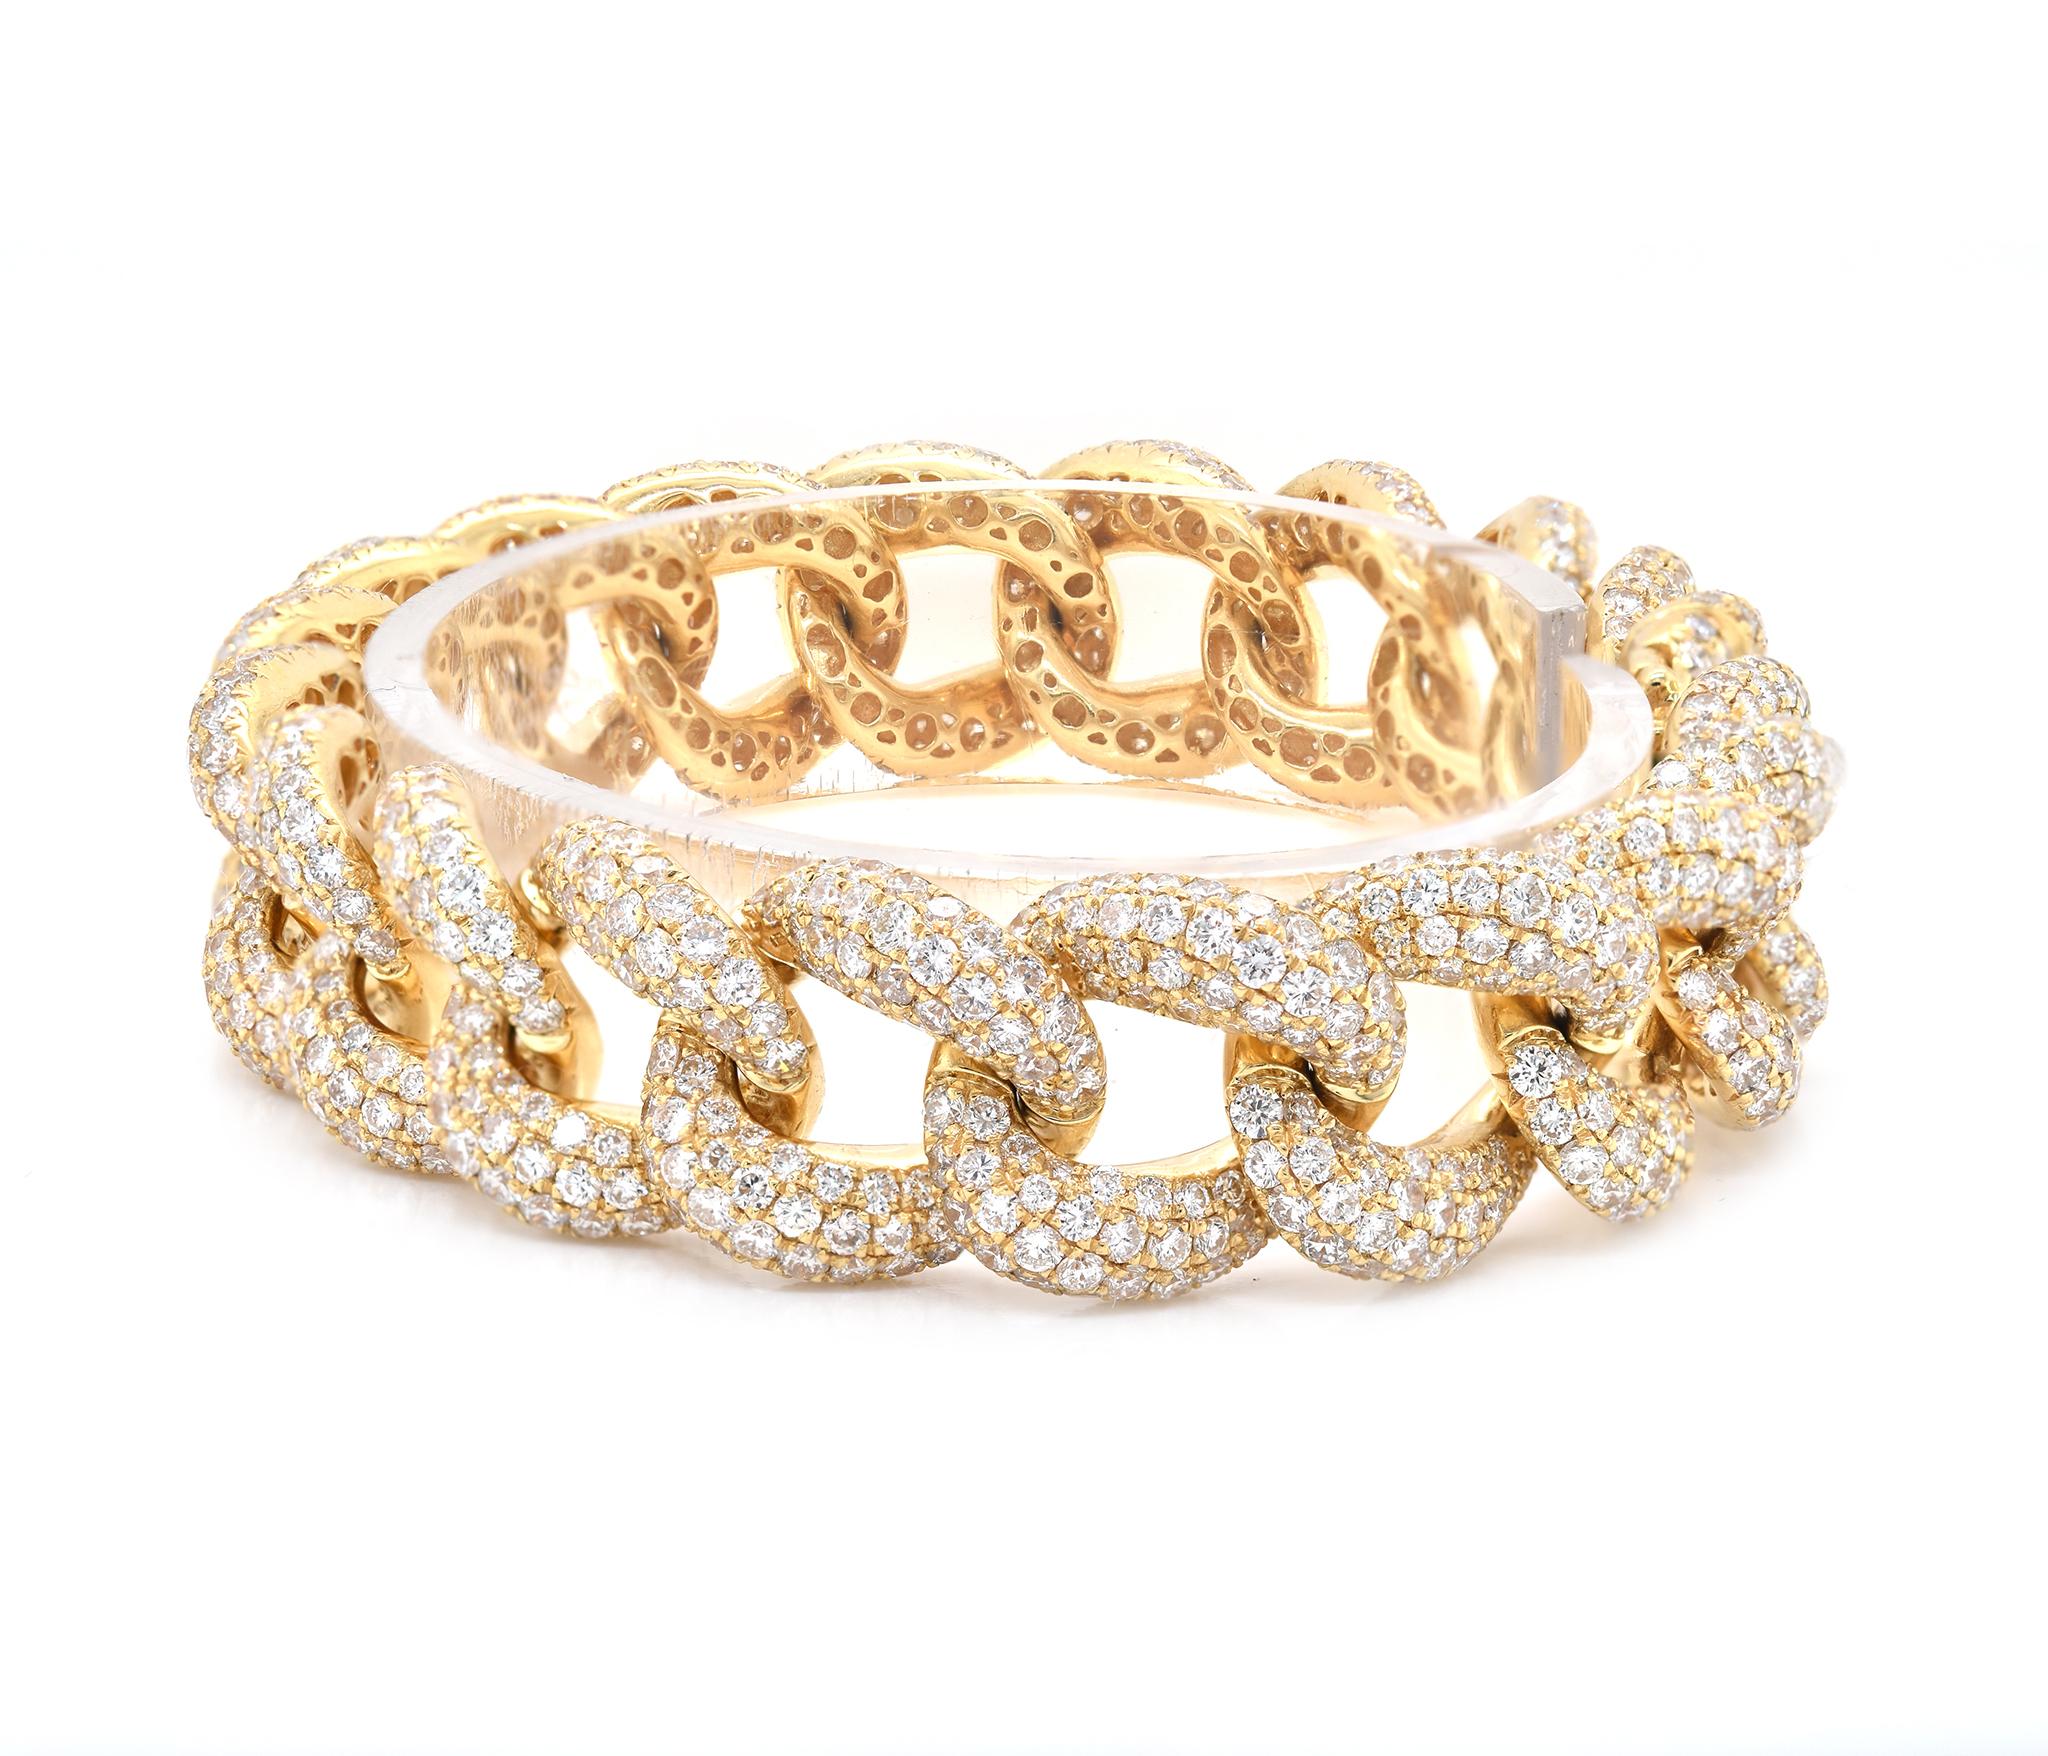 Designer: custom-designed 
Material: 18K yellow gold
Diamonds: 1292 round brilliant cut = 20.50cttw
Color: G
Clarity: VS2
Dimensions: bracelet will fit a 7-inch wrist 
Weight:  48.14 grams
